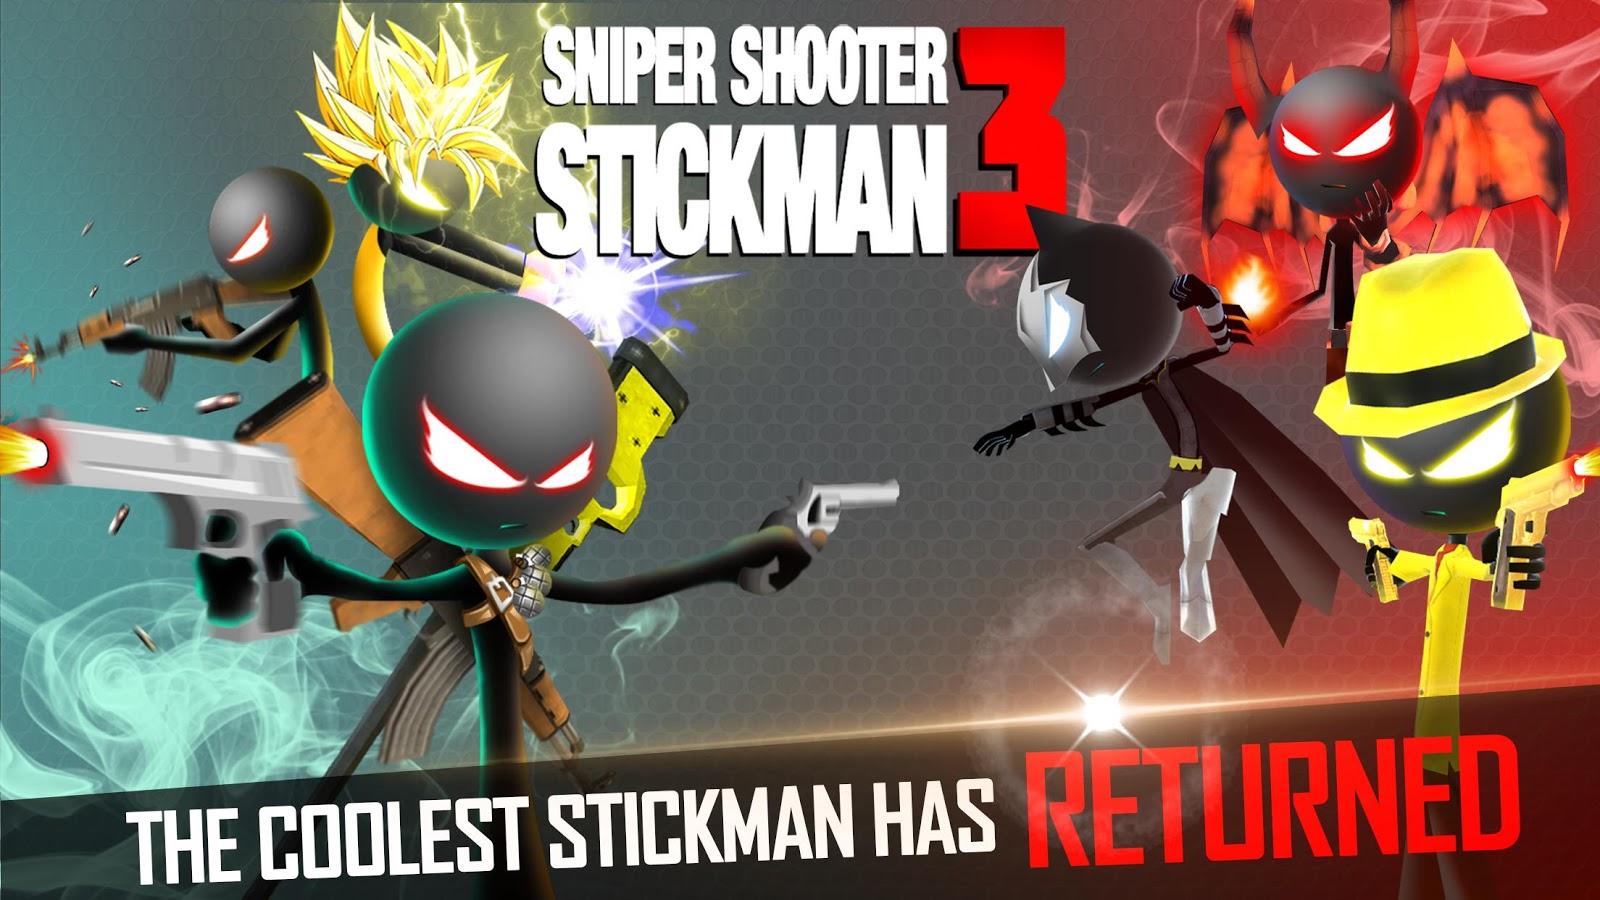 Sniper Shooter Stickman 3 Fury v1.0.2.2 APK for Android